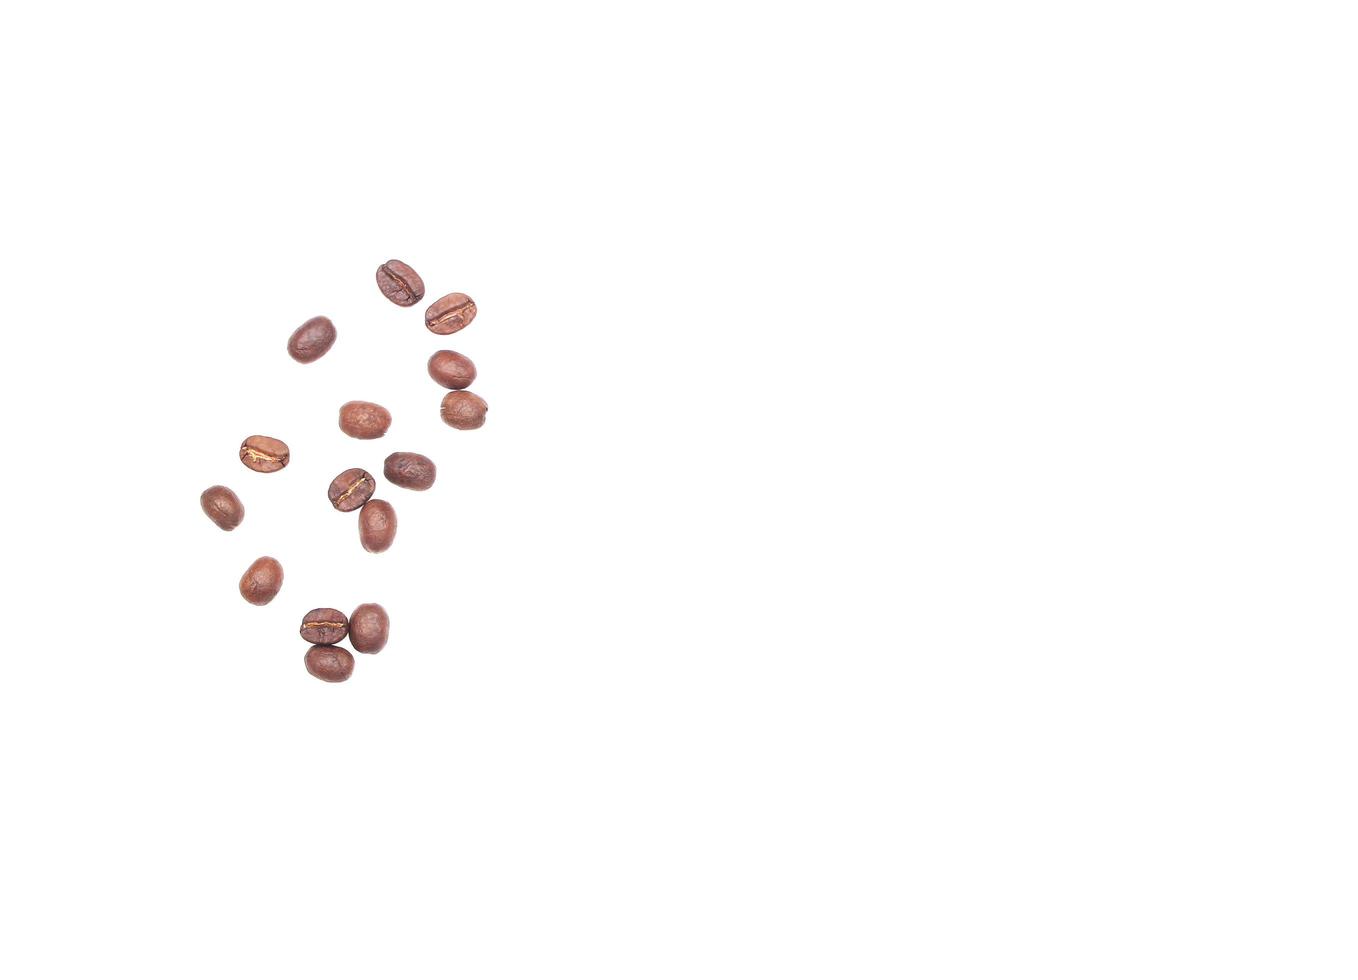 Small scatter of coffee beans photo